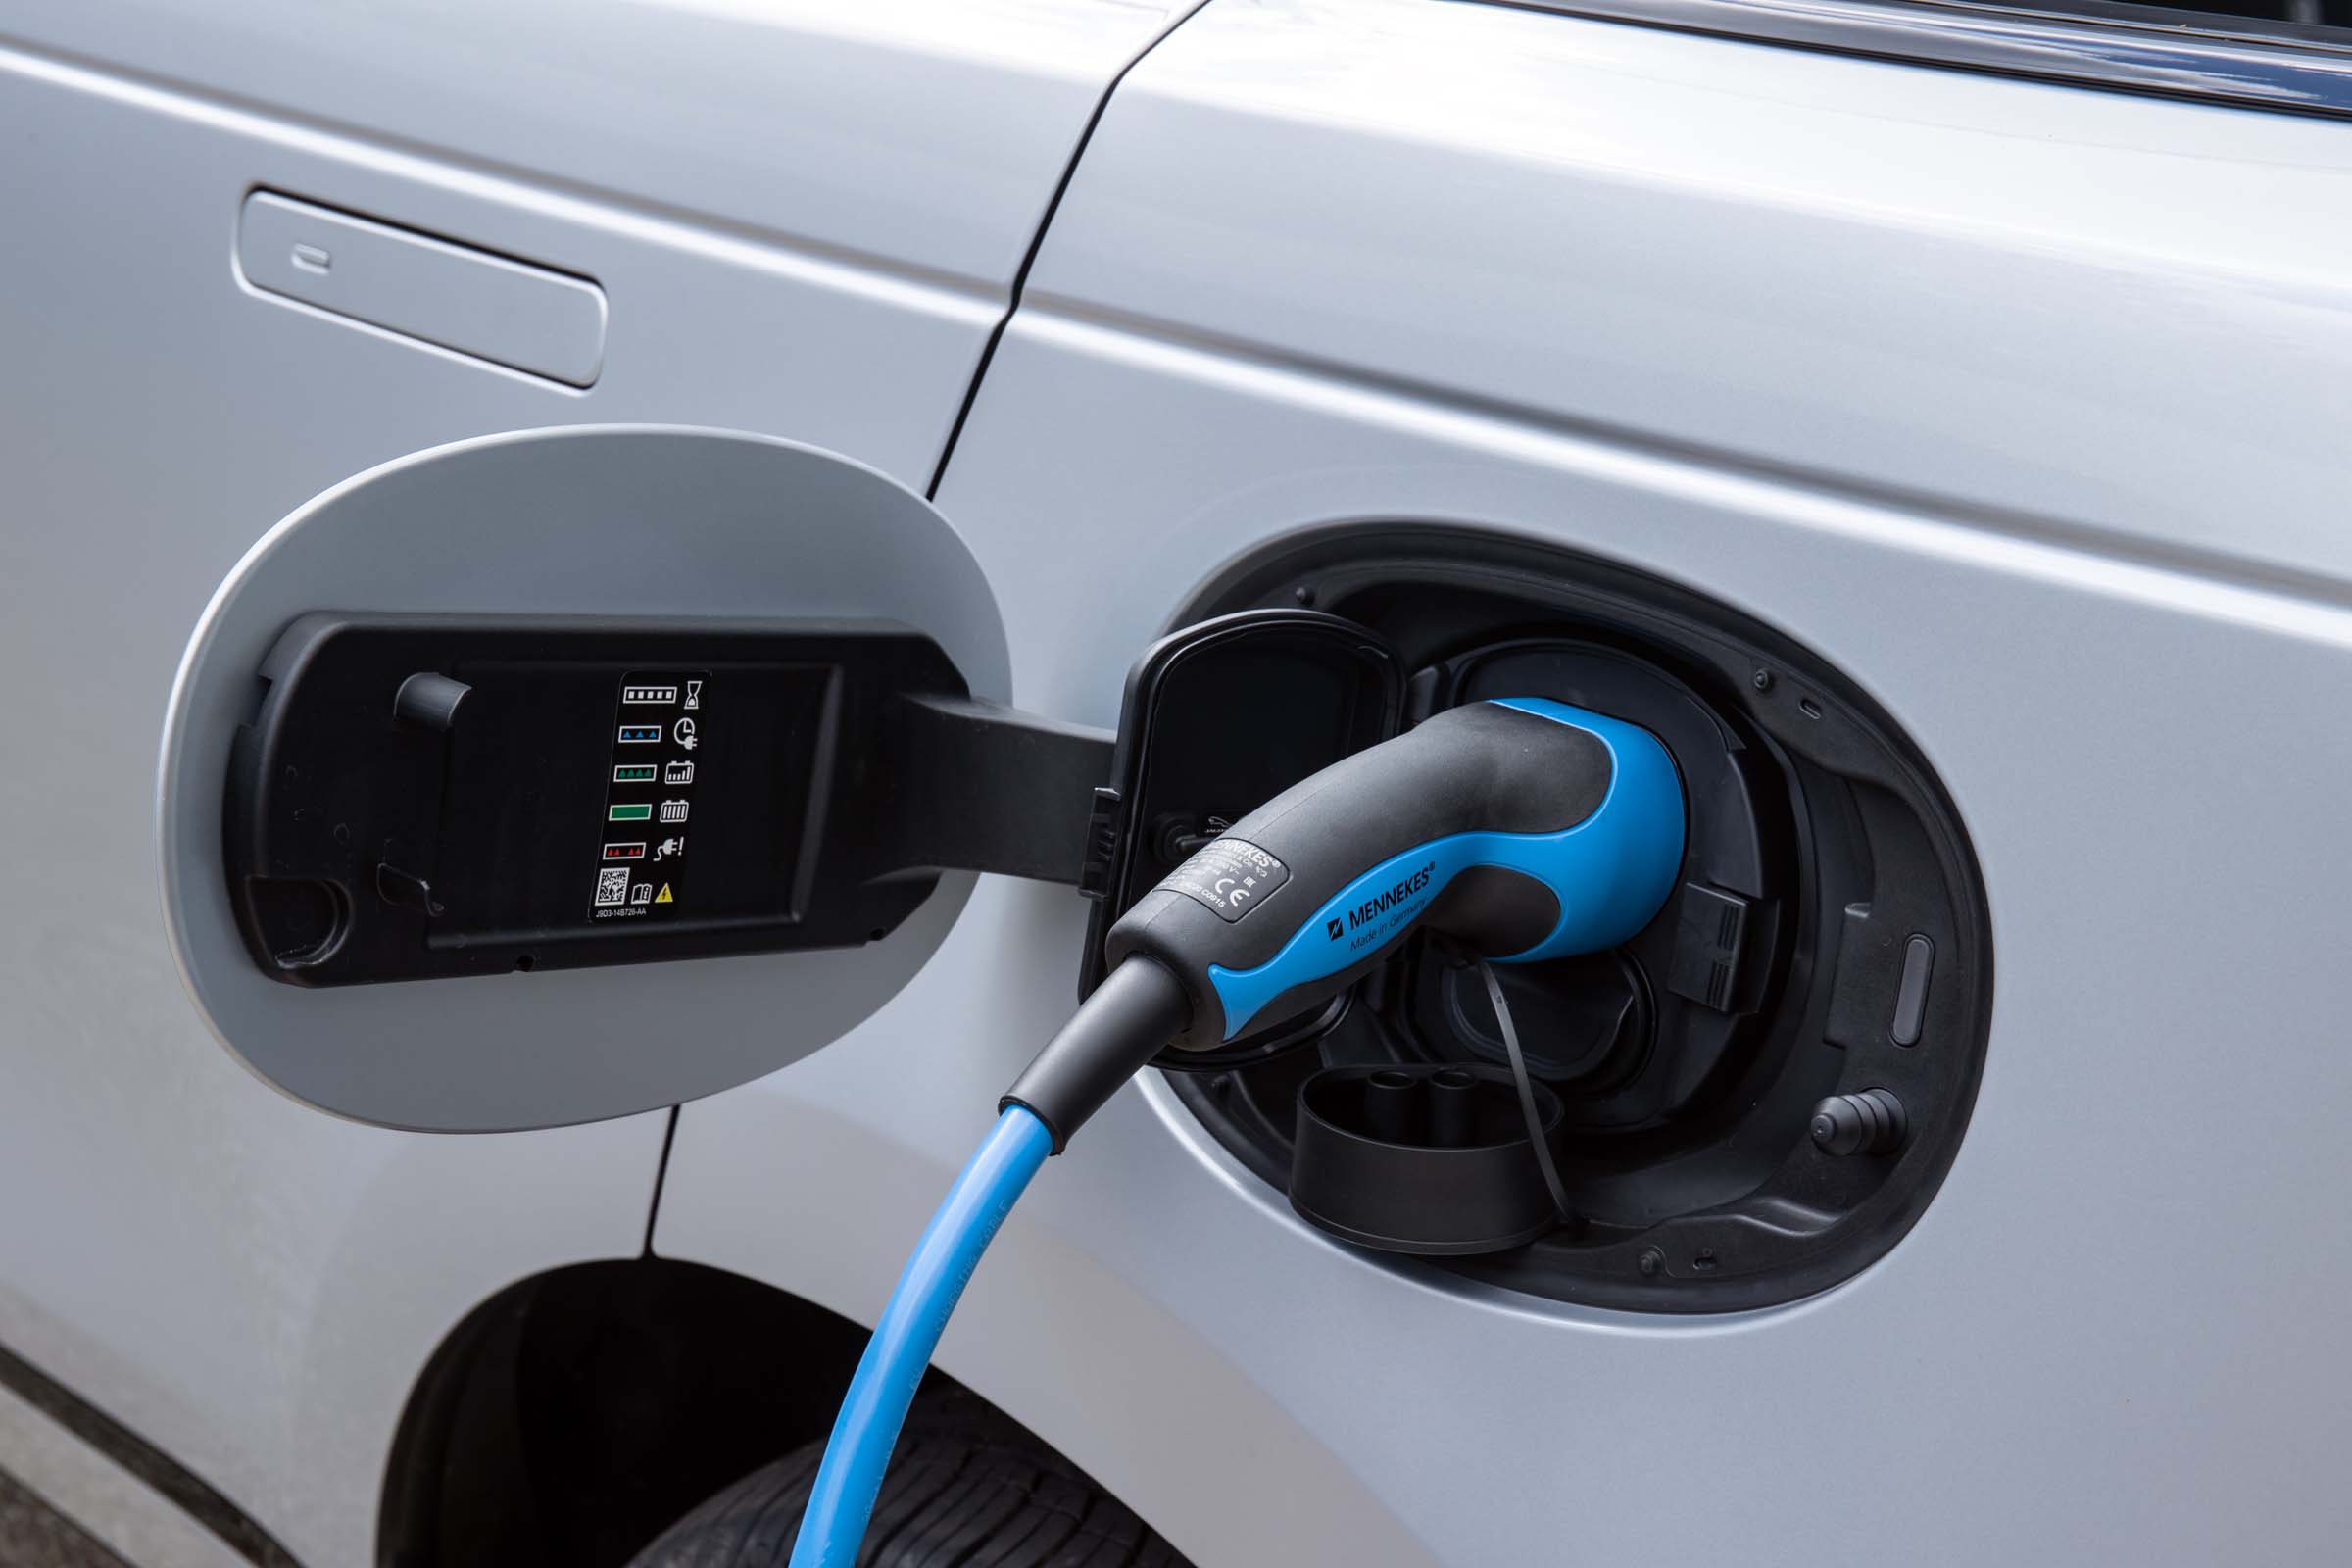 Rightcharge electriccar tariff and charging comparison site launches